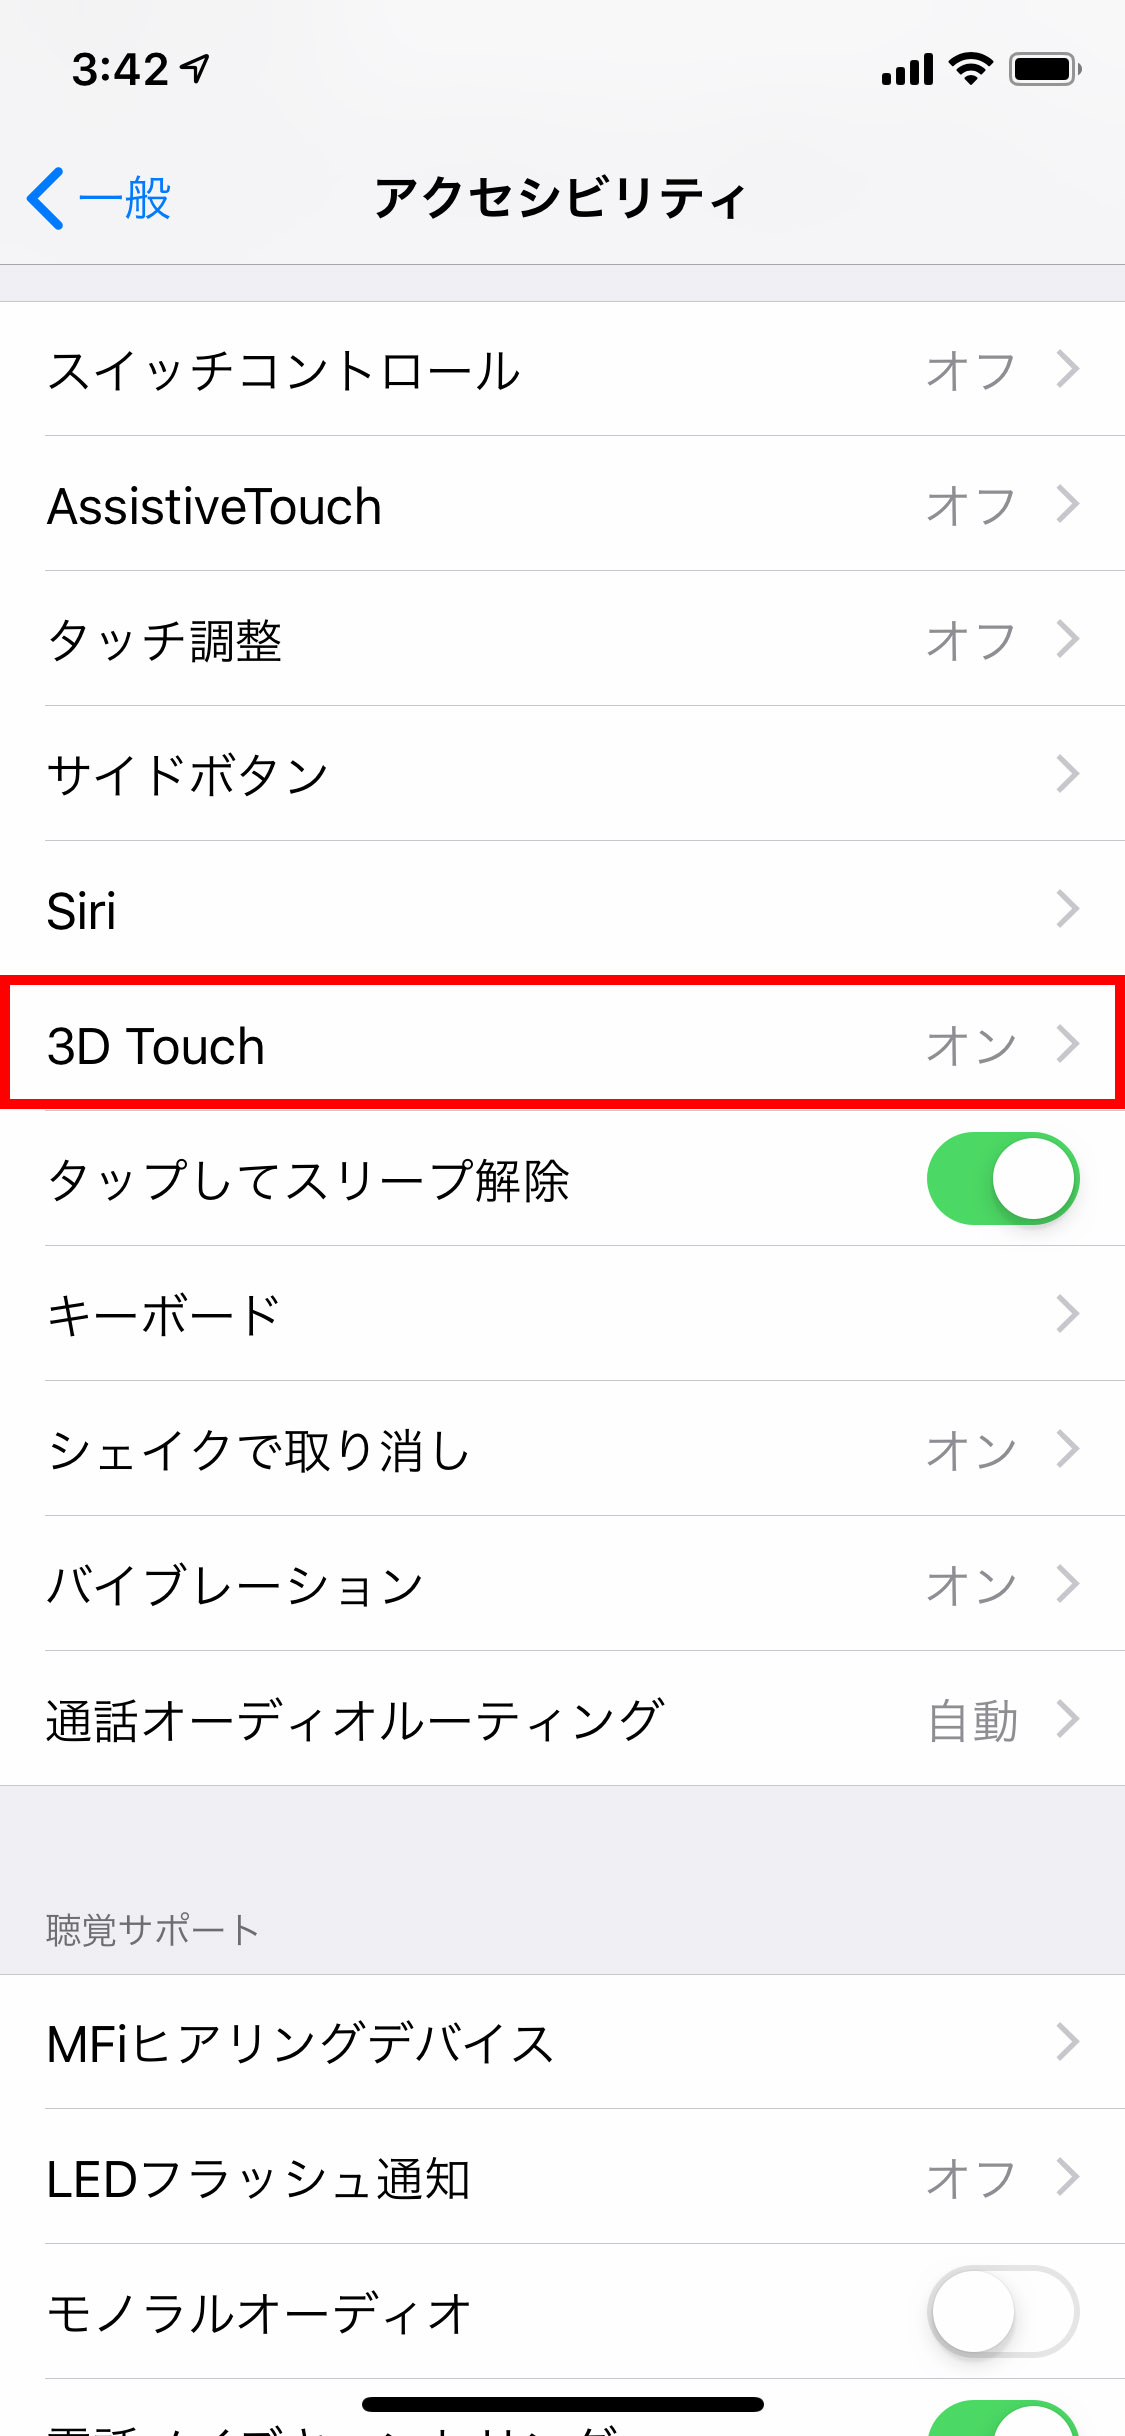 Iphoneの3d Touchとhaptic Touch 違いと使いこなし方 日経クロステック Xtech